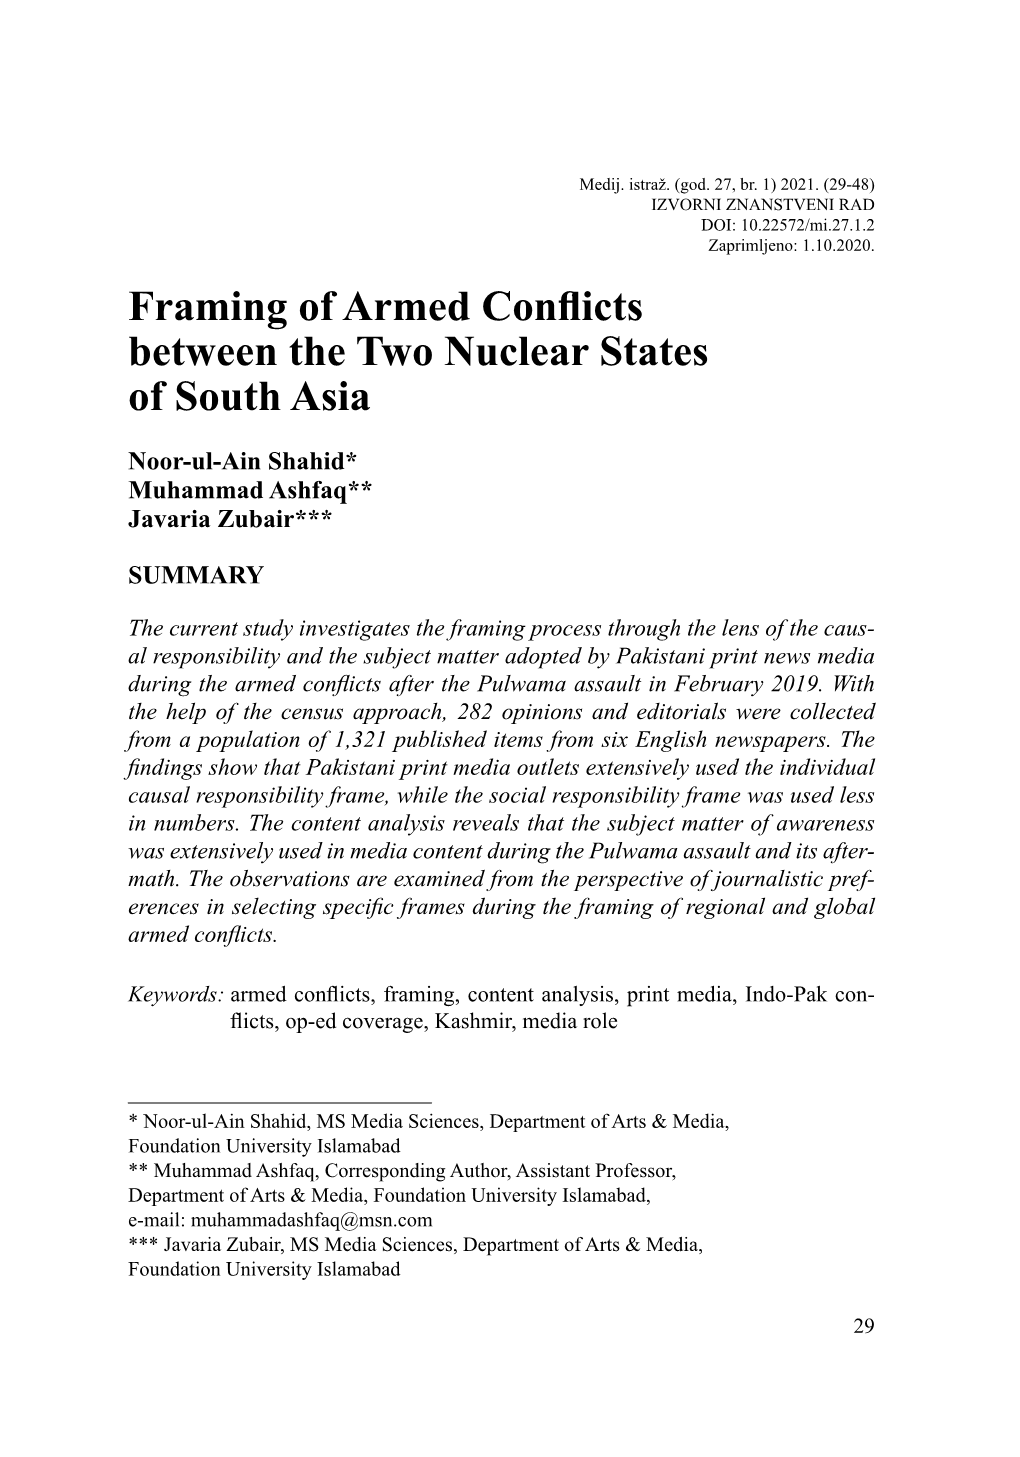 Framing of Armed Conflicts Between the Two Nuclear States of South Asia